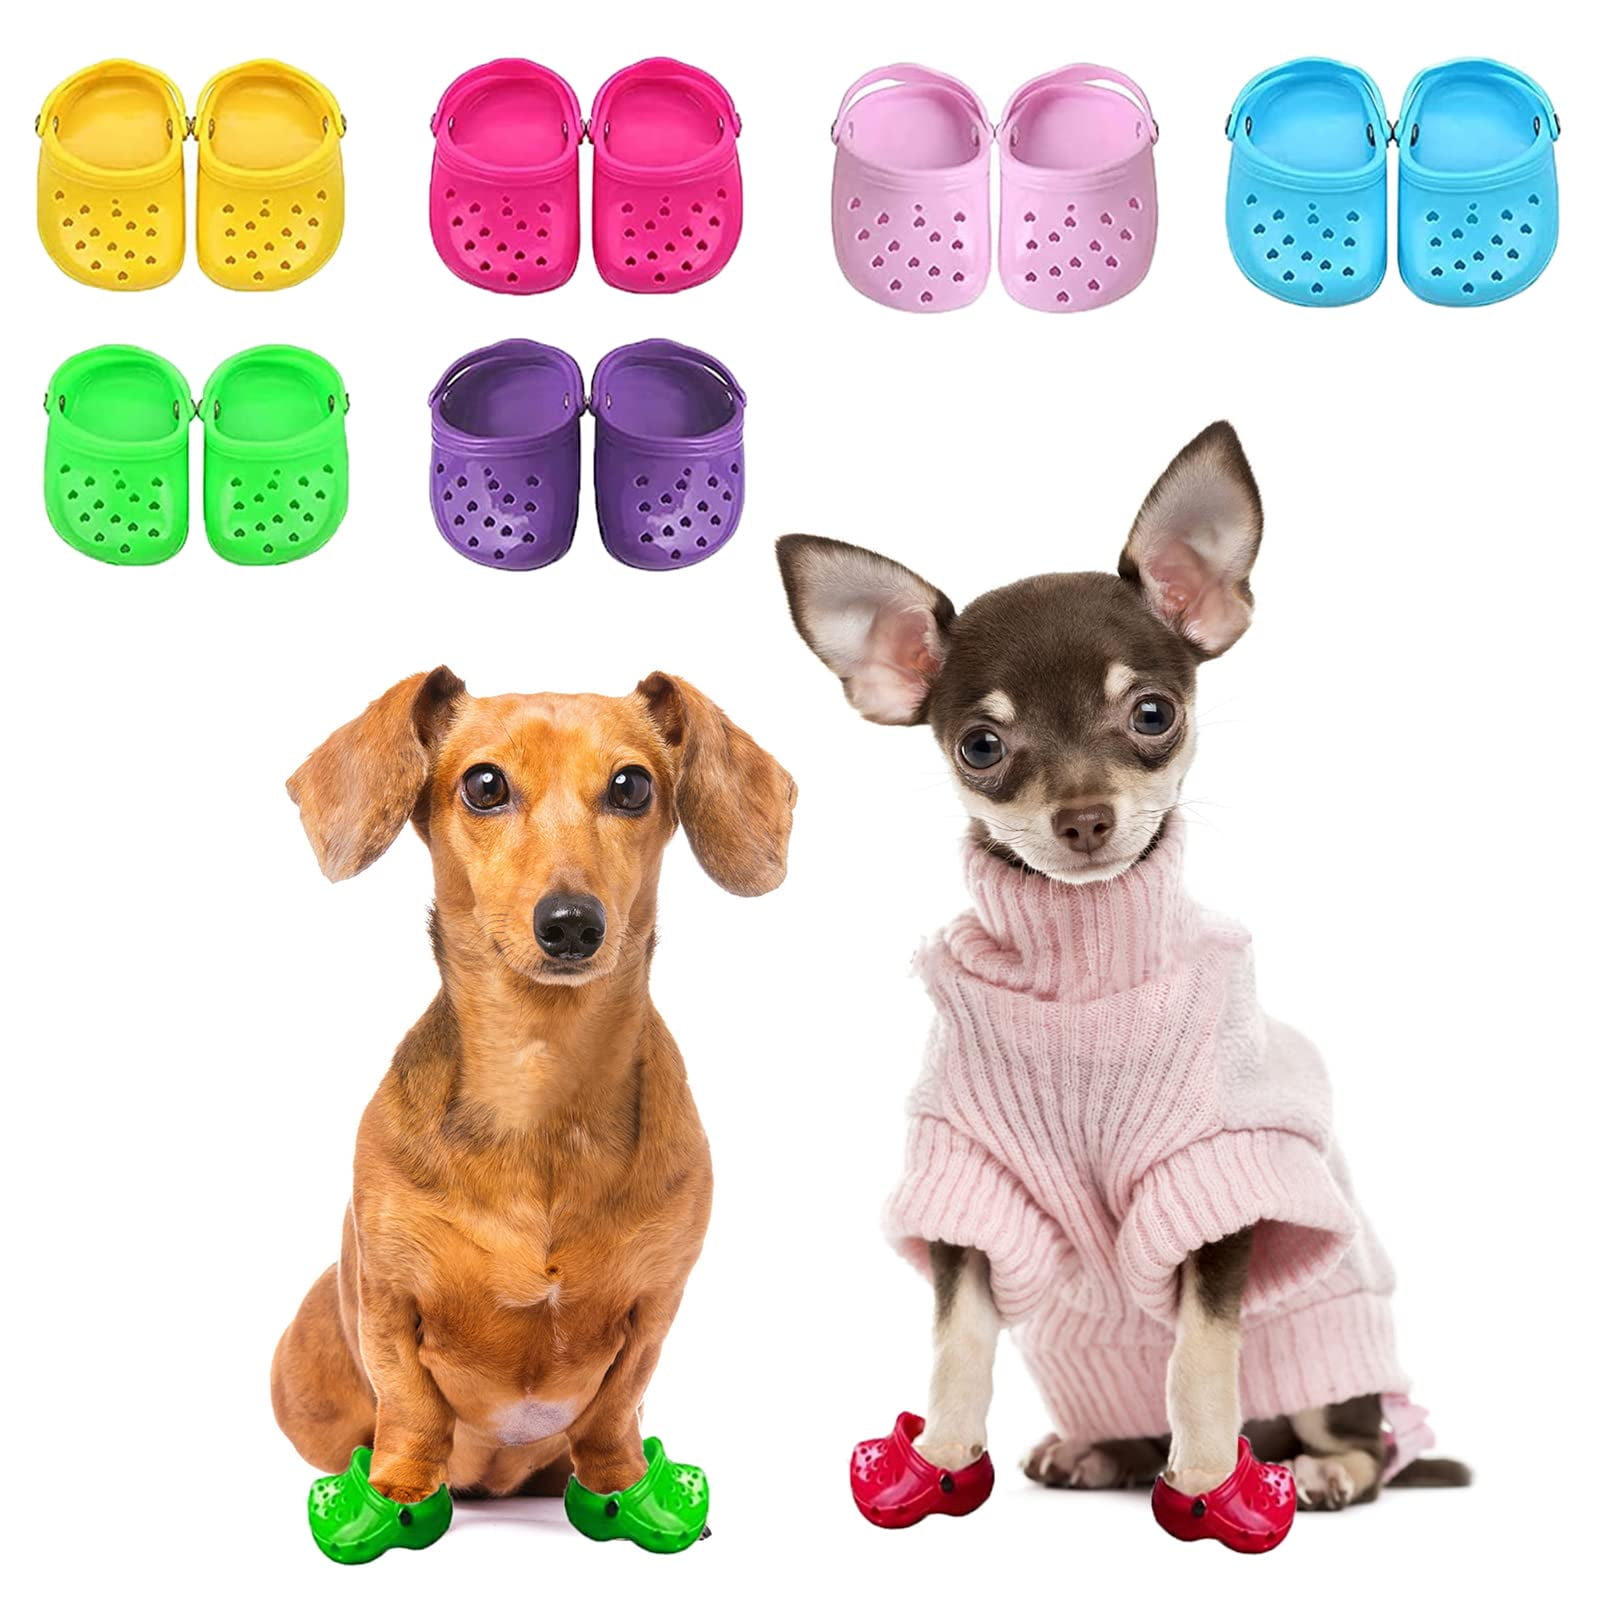 Puppy Shoes Pet Dog Croc Summer Candy Colors Sandals with Rugged Anti-Slip  Sole, Breathable Comfortable Dog Shoes Gift for Pet Festival 